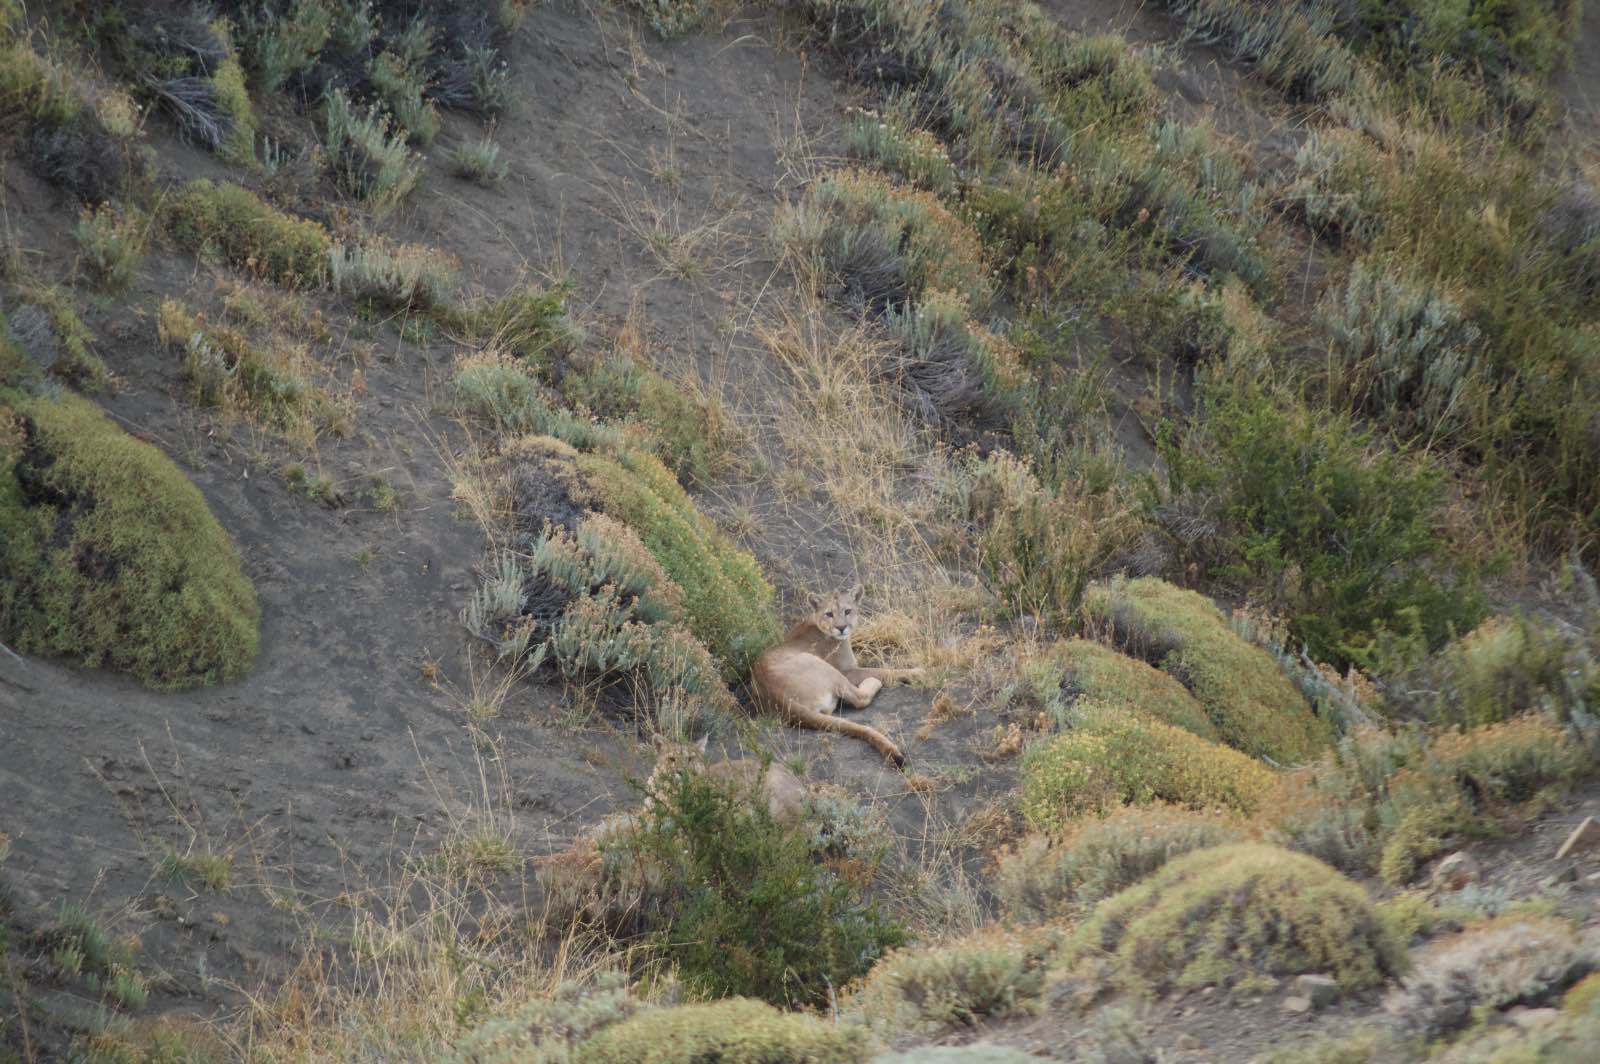 Look out for pumas, guanacos, foxes, and other wildlife